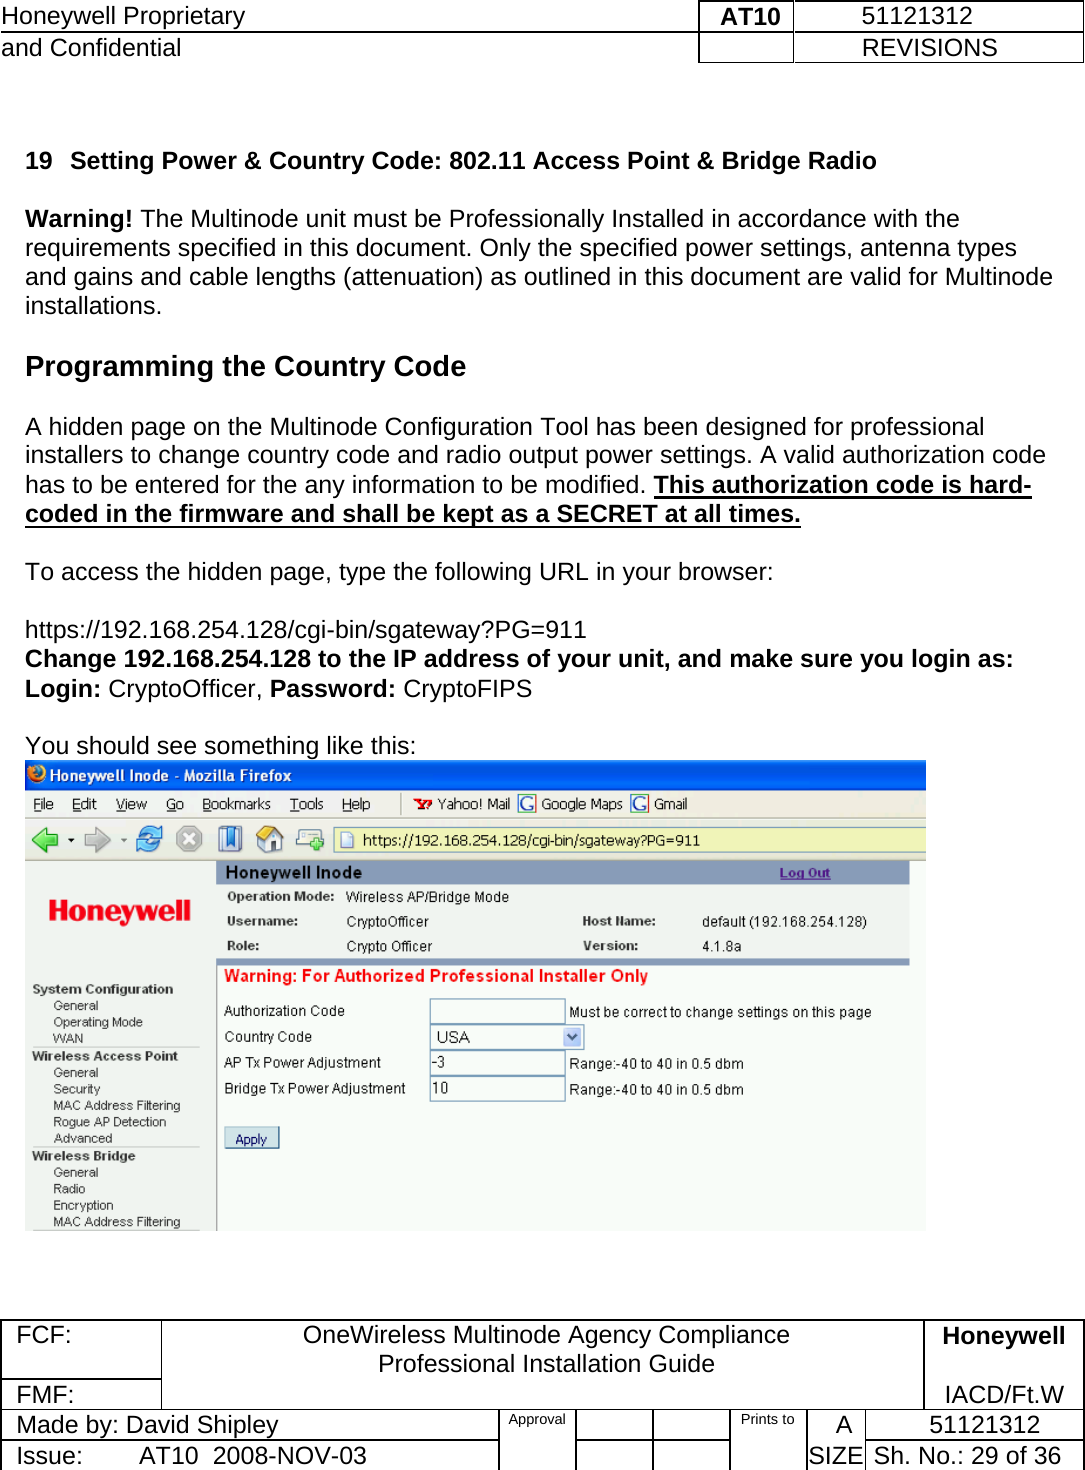 Honeywell Proprietary    AT10          51121312 and Confidential             REVISIONS  FCF:  OneWireless Multinode Agency Compliance Professional Installation Guide  Honeywell FMF:               IACD/Ft.W Made by: David Shipley  Approval   Prints to     A           51121312 Issue:        AT10  2008-NOV-03          SIZE  Sh. No.: 29 of 36   19  Setting Power &amp; Country Code: 802.11 Access Point &amp; Bridge Radio  Warning! The Multinode unit must be Professionally Installed in accordance with the requirements specified in this document. Only the specified power settings, antenna types and gains and cable lengths (attenuation) as outlined in this document are valid for Multinode installations.   Programming the Country Code  A hidden page on the Multinode Configuration Tool has been designed for professional installers to change country code and radio output power settings. A valid authorization code has to be entered for the any information to be modified. This authorization code is hard-coded in the firmware and shall be kept as a SECRET at all times.  To access the hidden page, type the following URL in your browser:  https://192.168.254.128/cgi-bin/sgateway?PG=911 Change 192.168.254.128 to the IP address of your unit, and make sure you login as:  Login: CryptoOfficer, Password: CryptoFIPS   You should see something like this:    